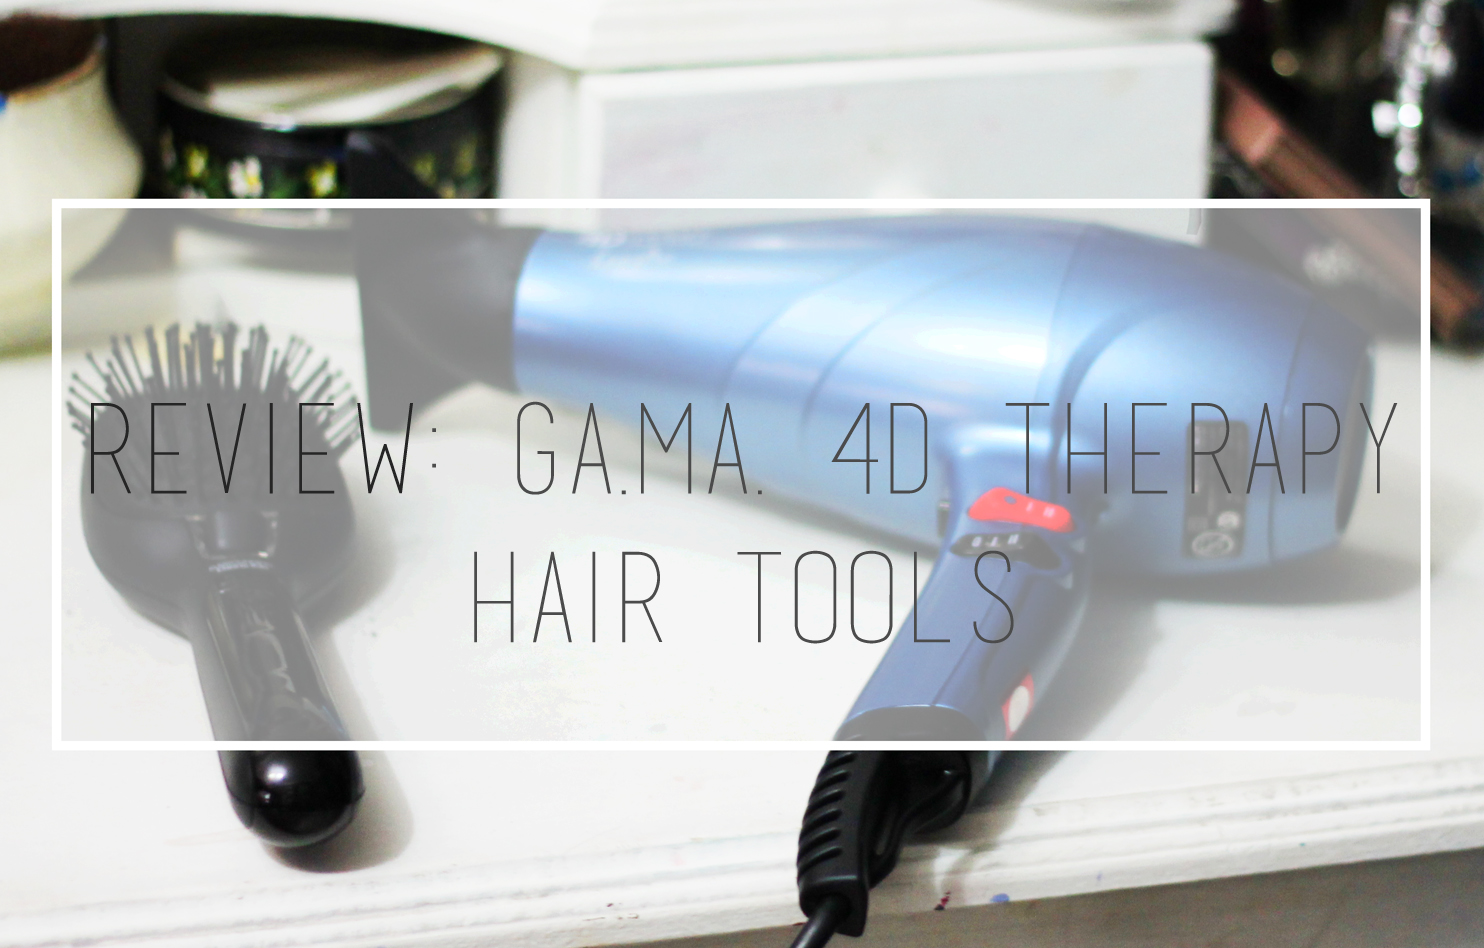 Review: Ga.Ma 4D Therapy hair tools